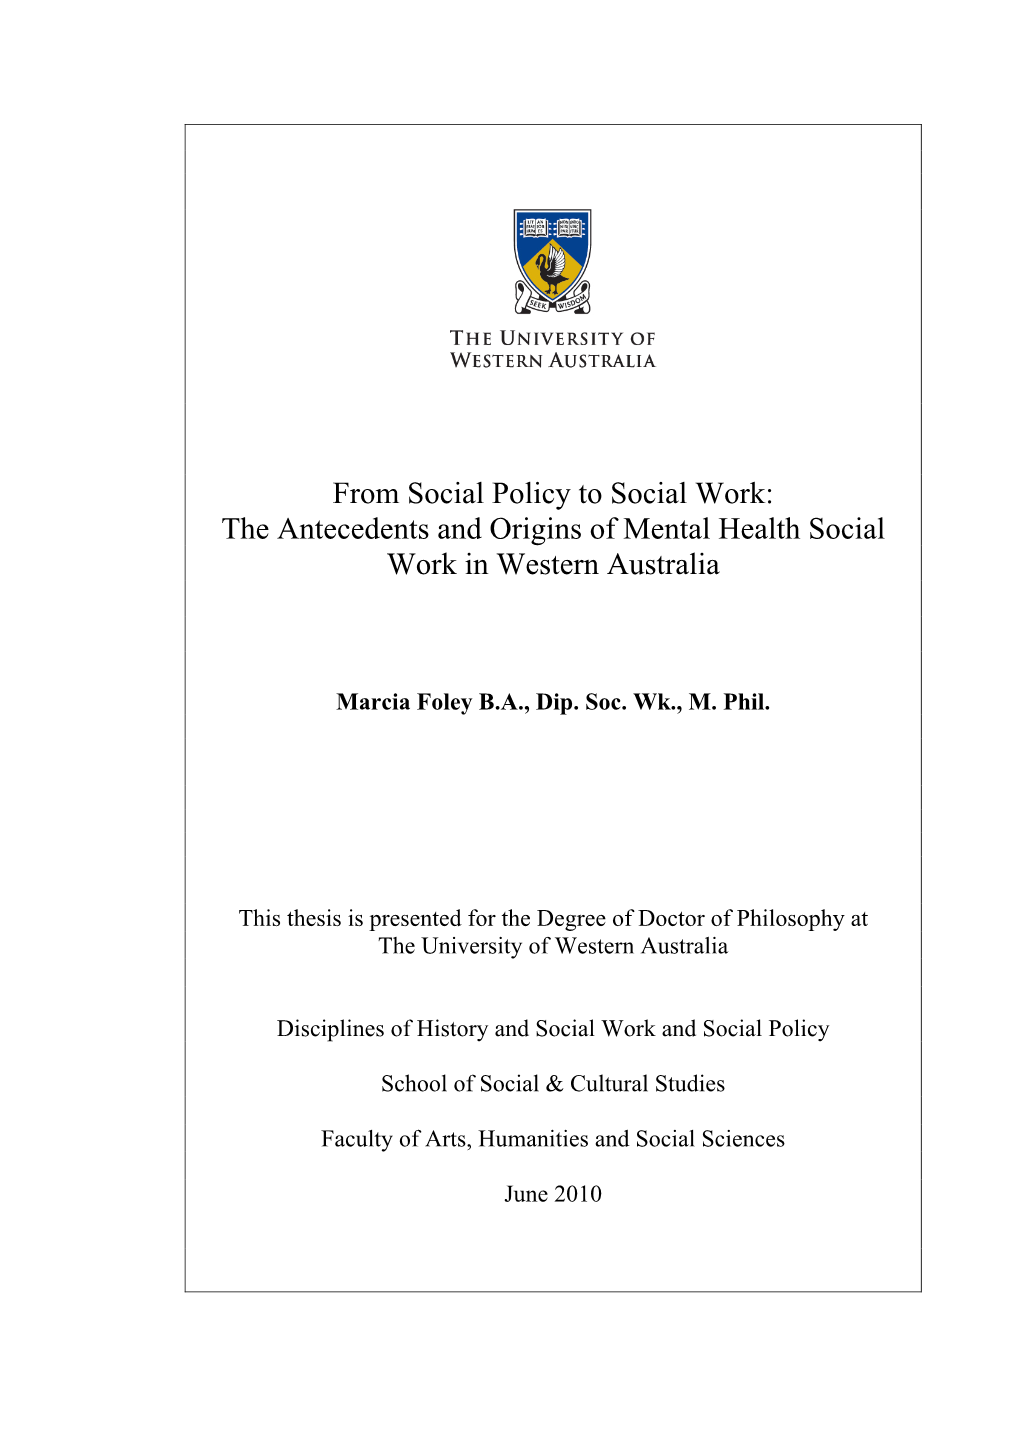 The Antecedents and Origins of Mental Health Social Work in Western Australia